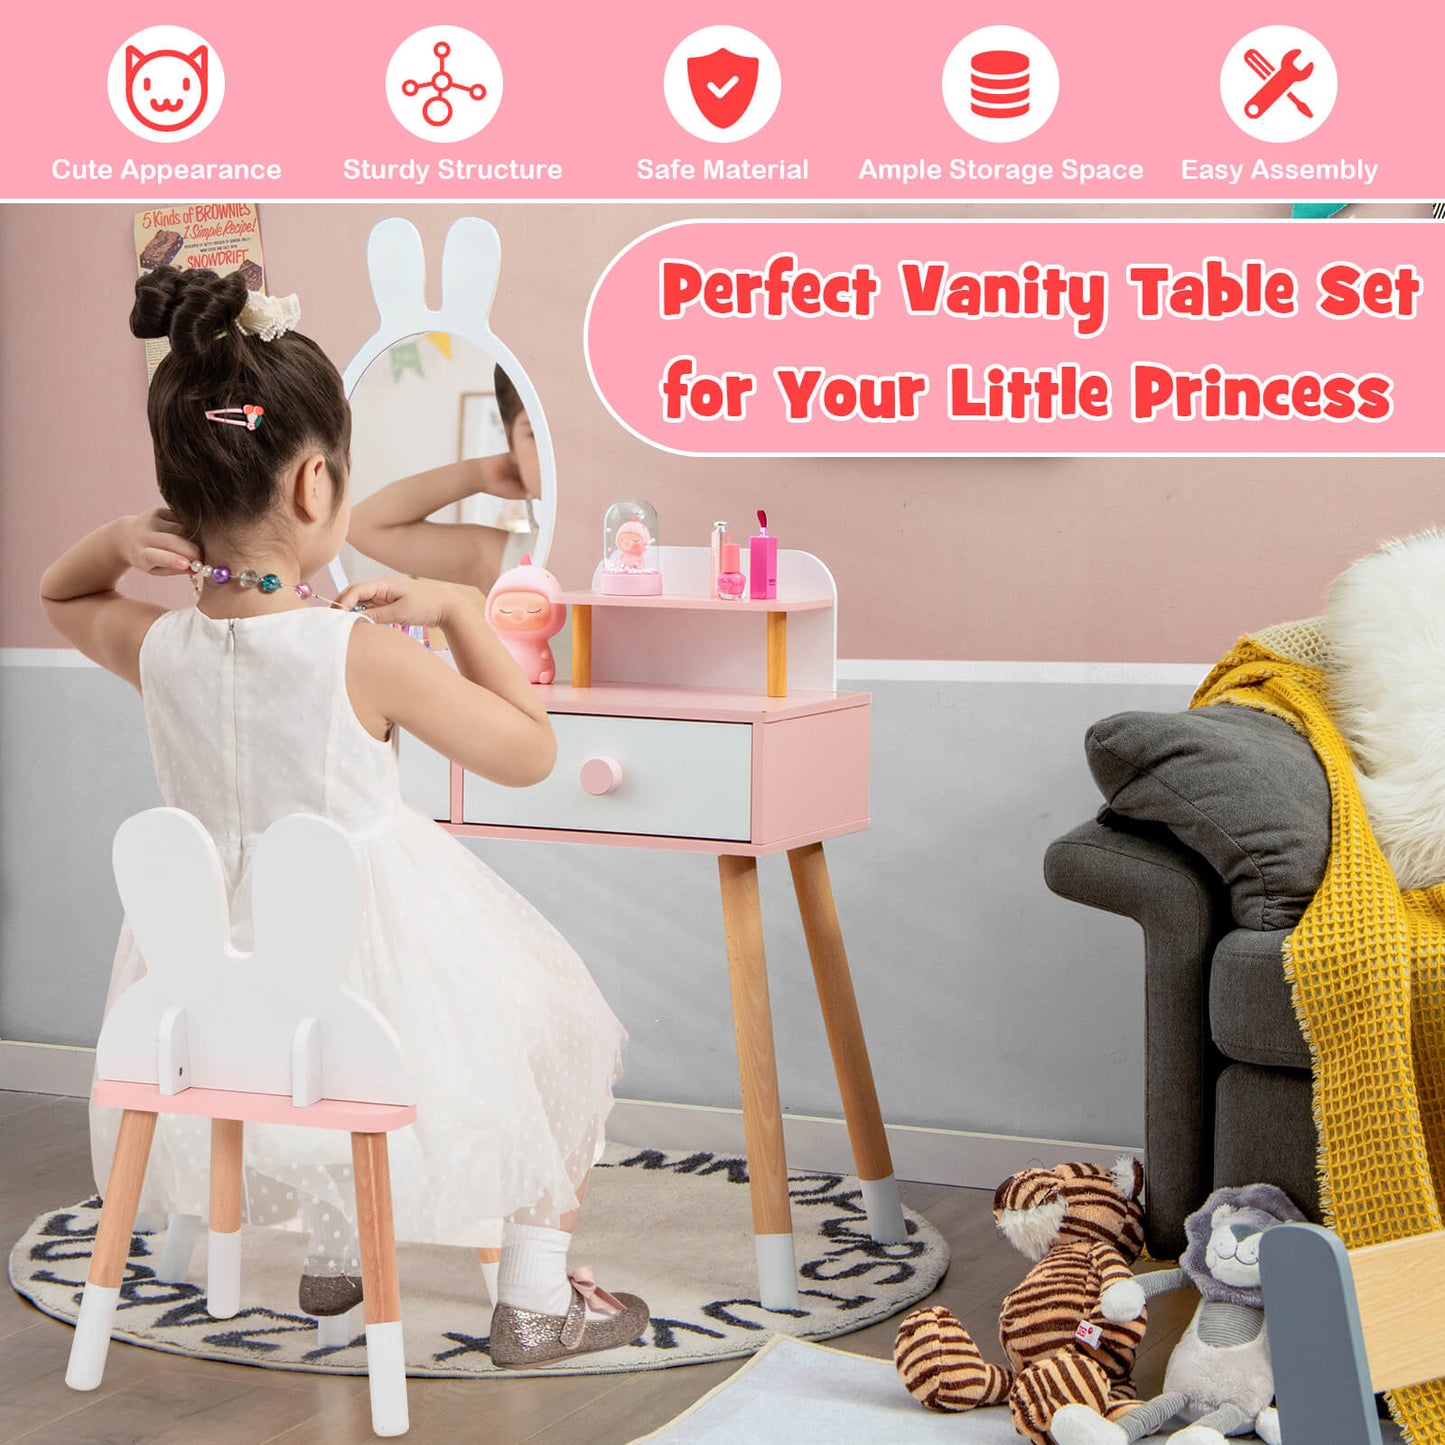 Kids Vanity Table and Chair Set with Drawer Shelf and Rabbit Mirror, White